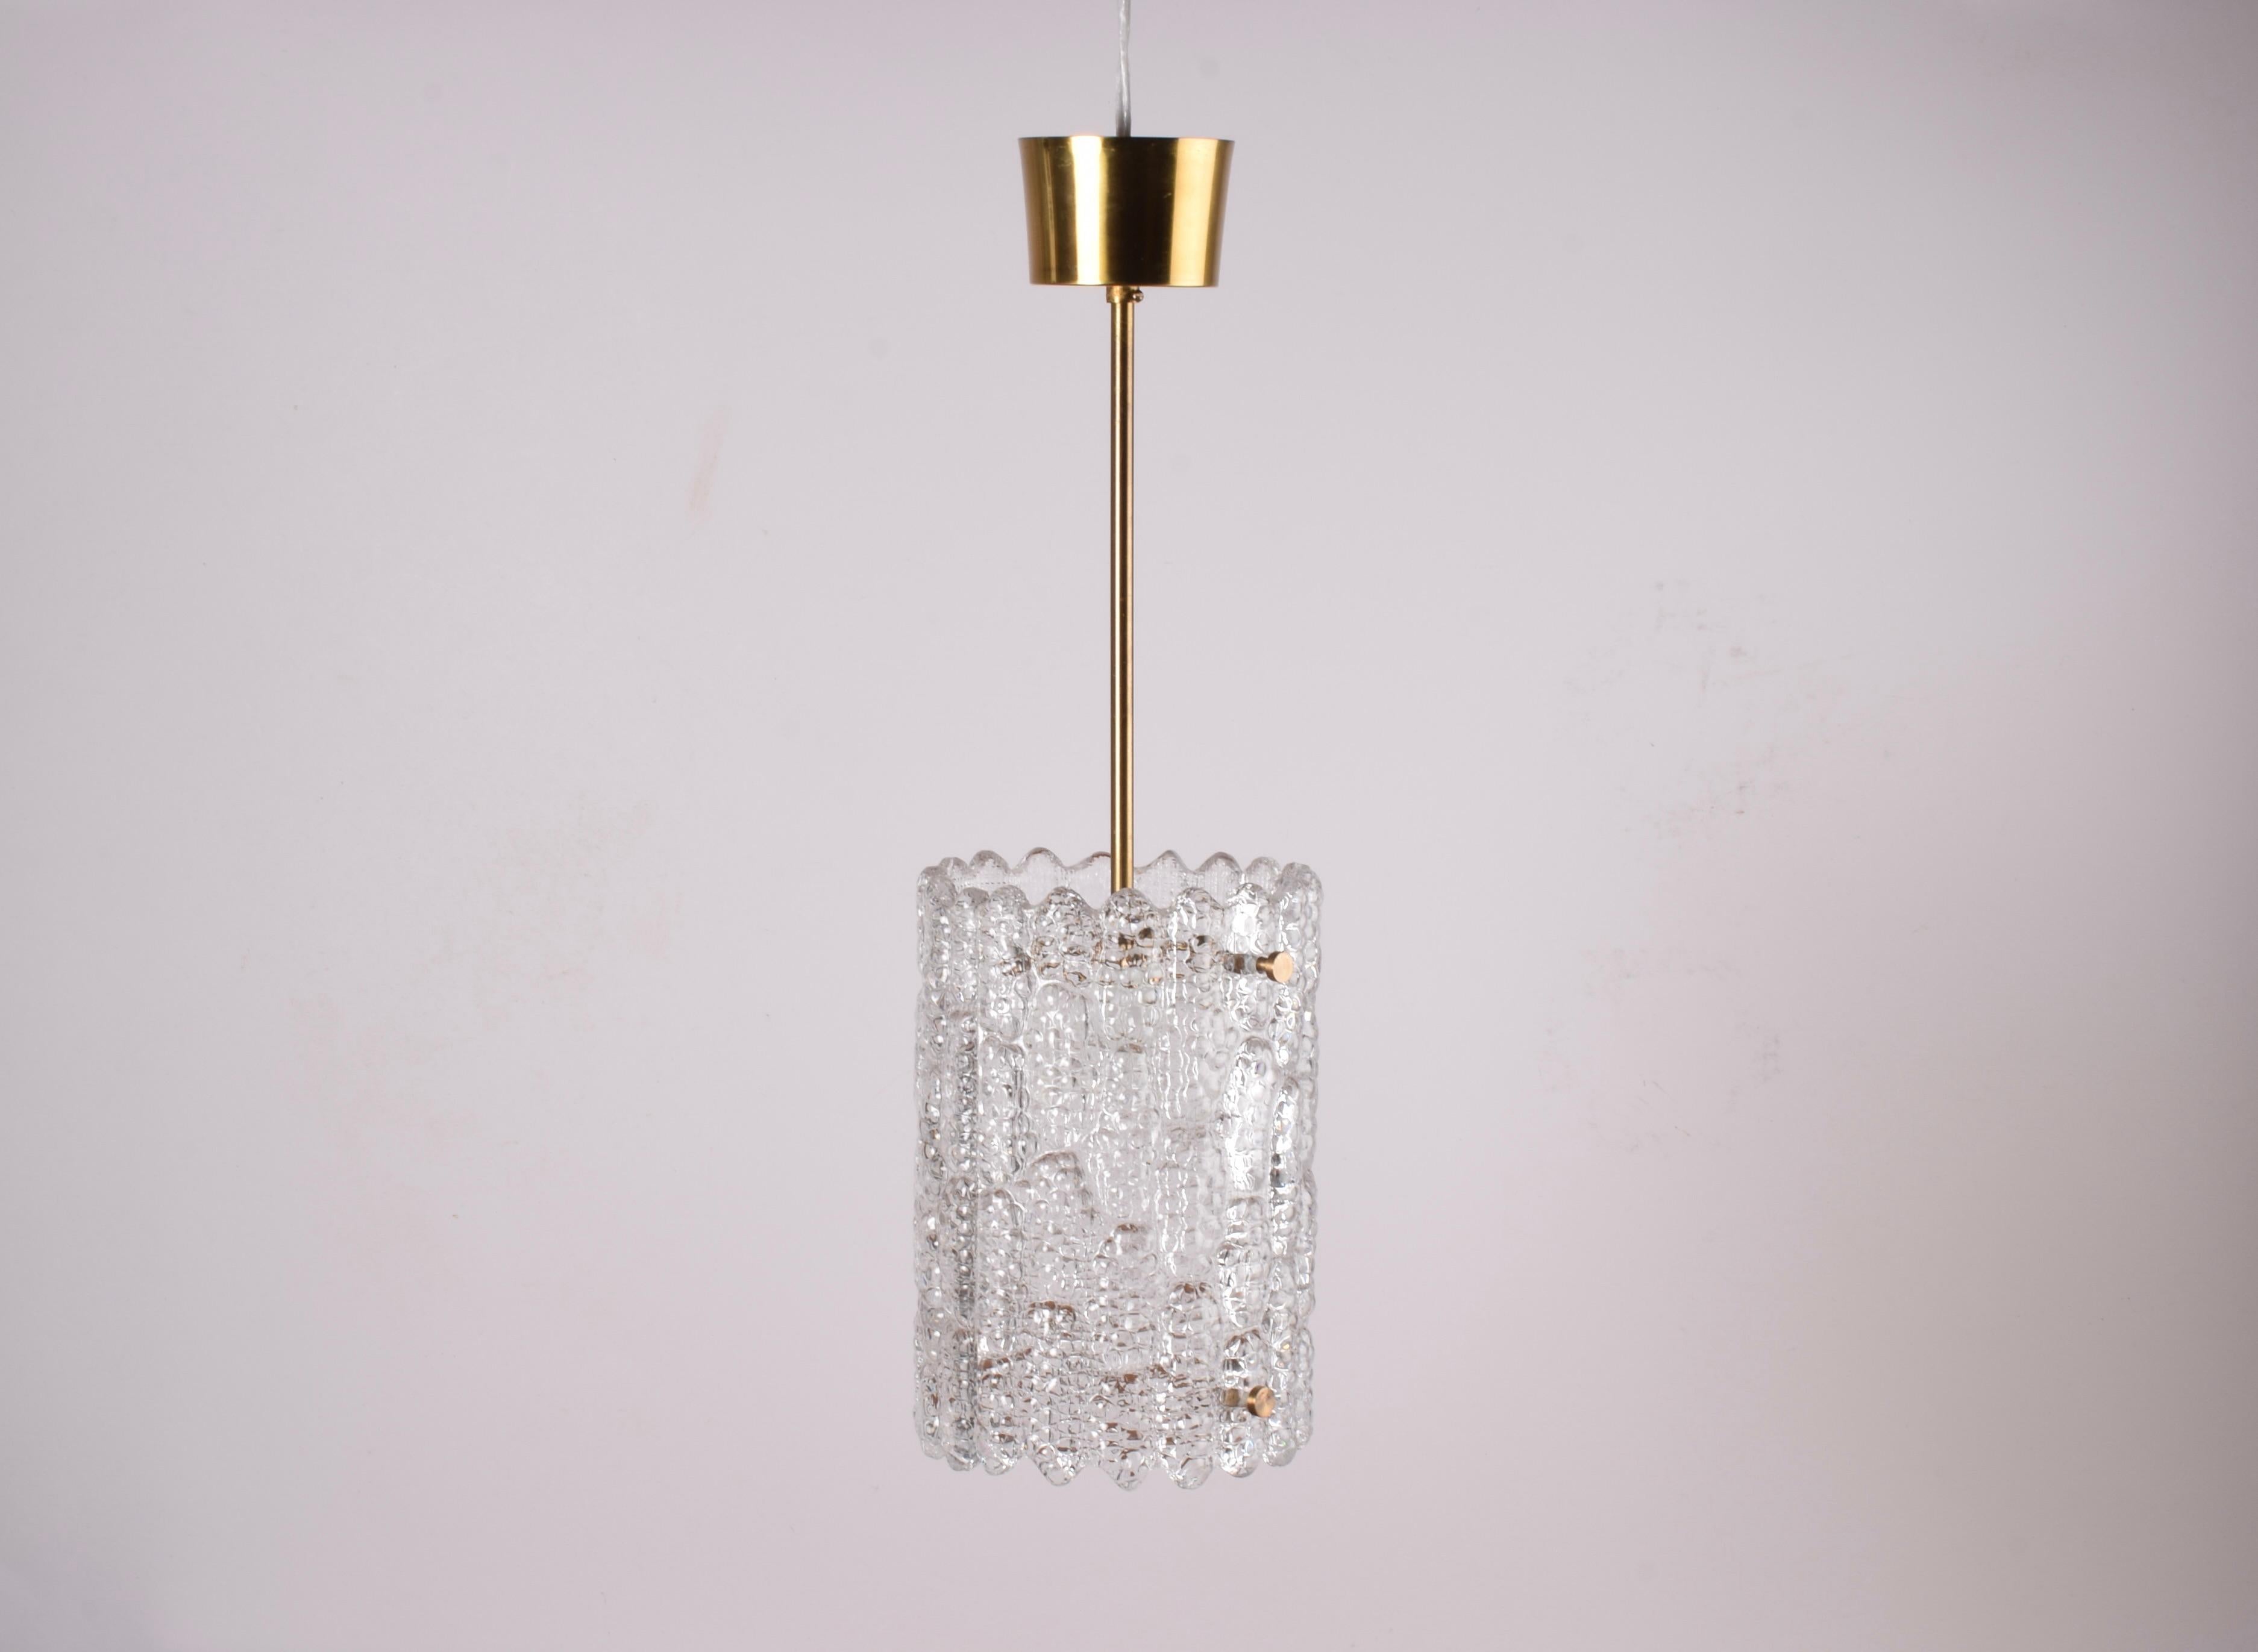 Vintage glass pendant by the Swedish designer Carl Fagerlund for Orrefors. Manufactured in the 1960s. 

The lamp is made of pressed translucent glass and has beautiful parts made from brass. The brass canopy is also included.

The lamps require E27